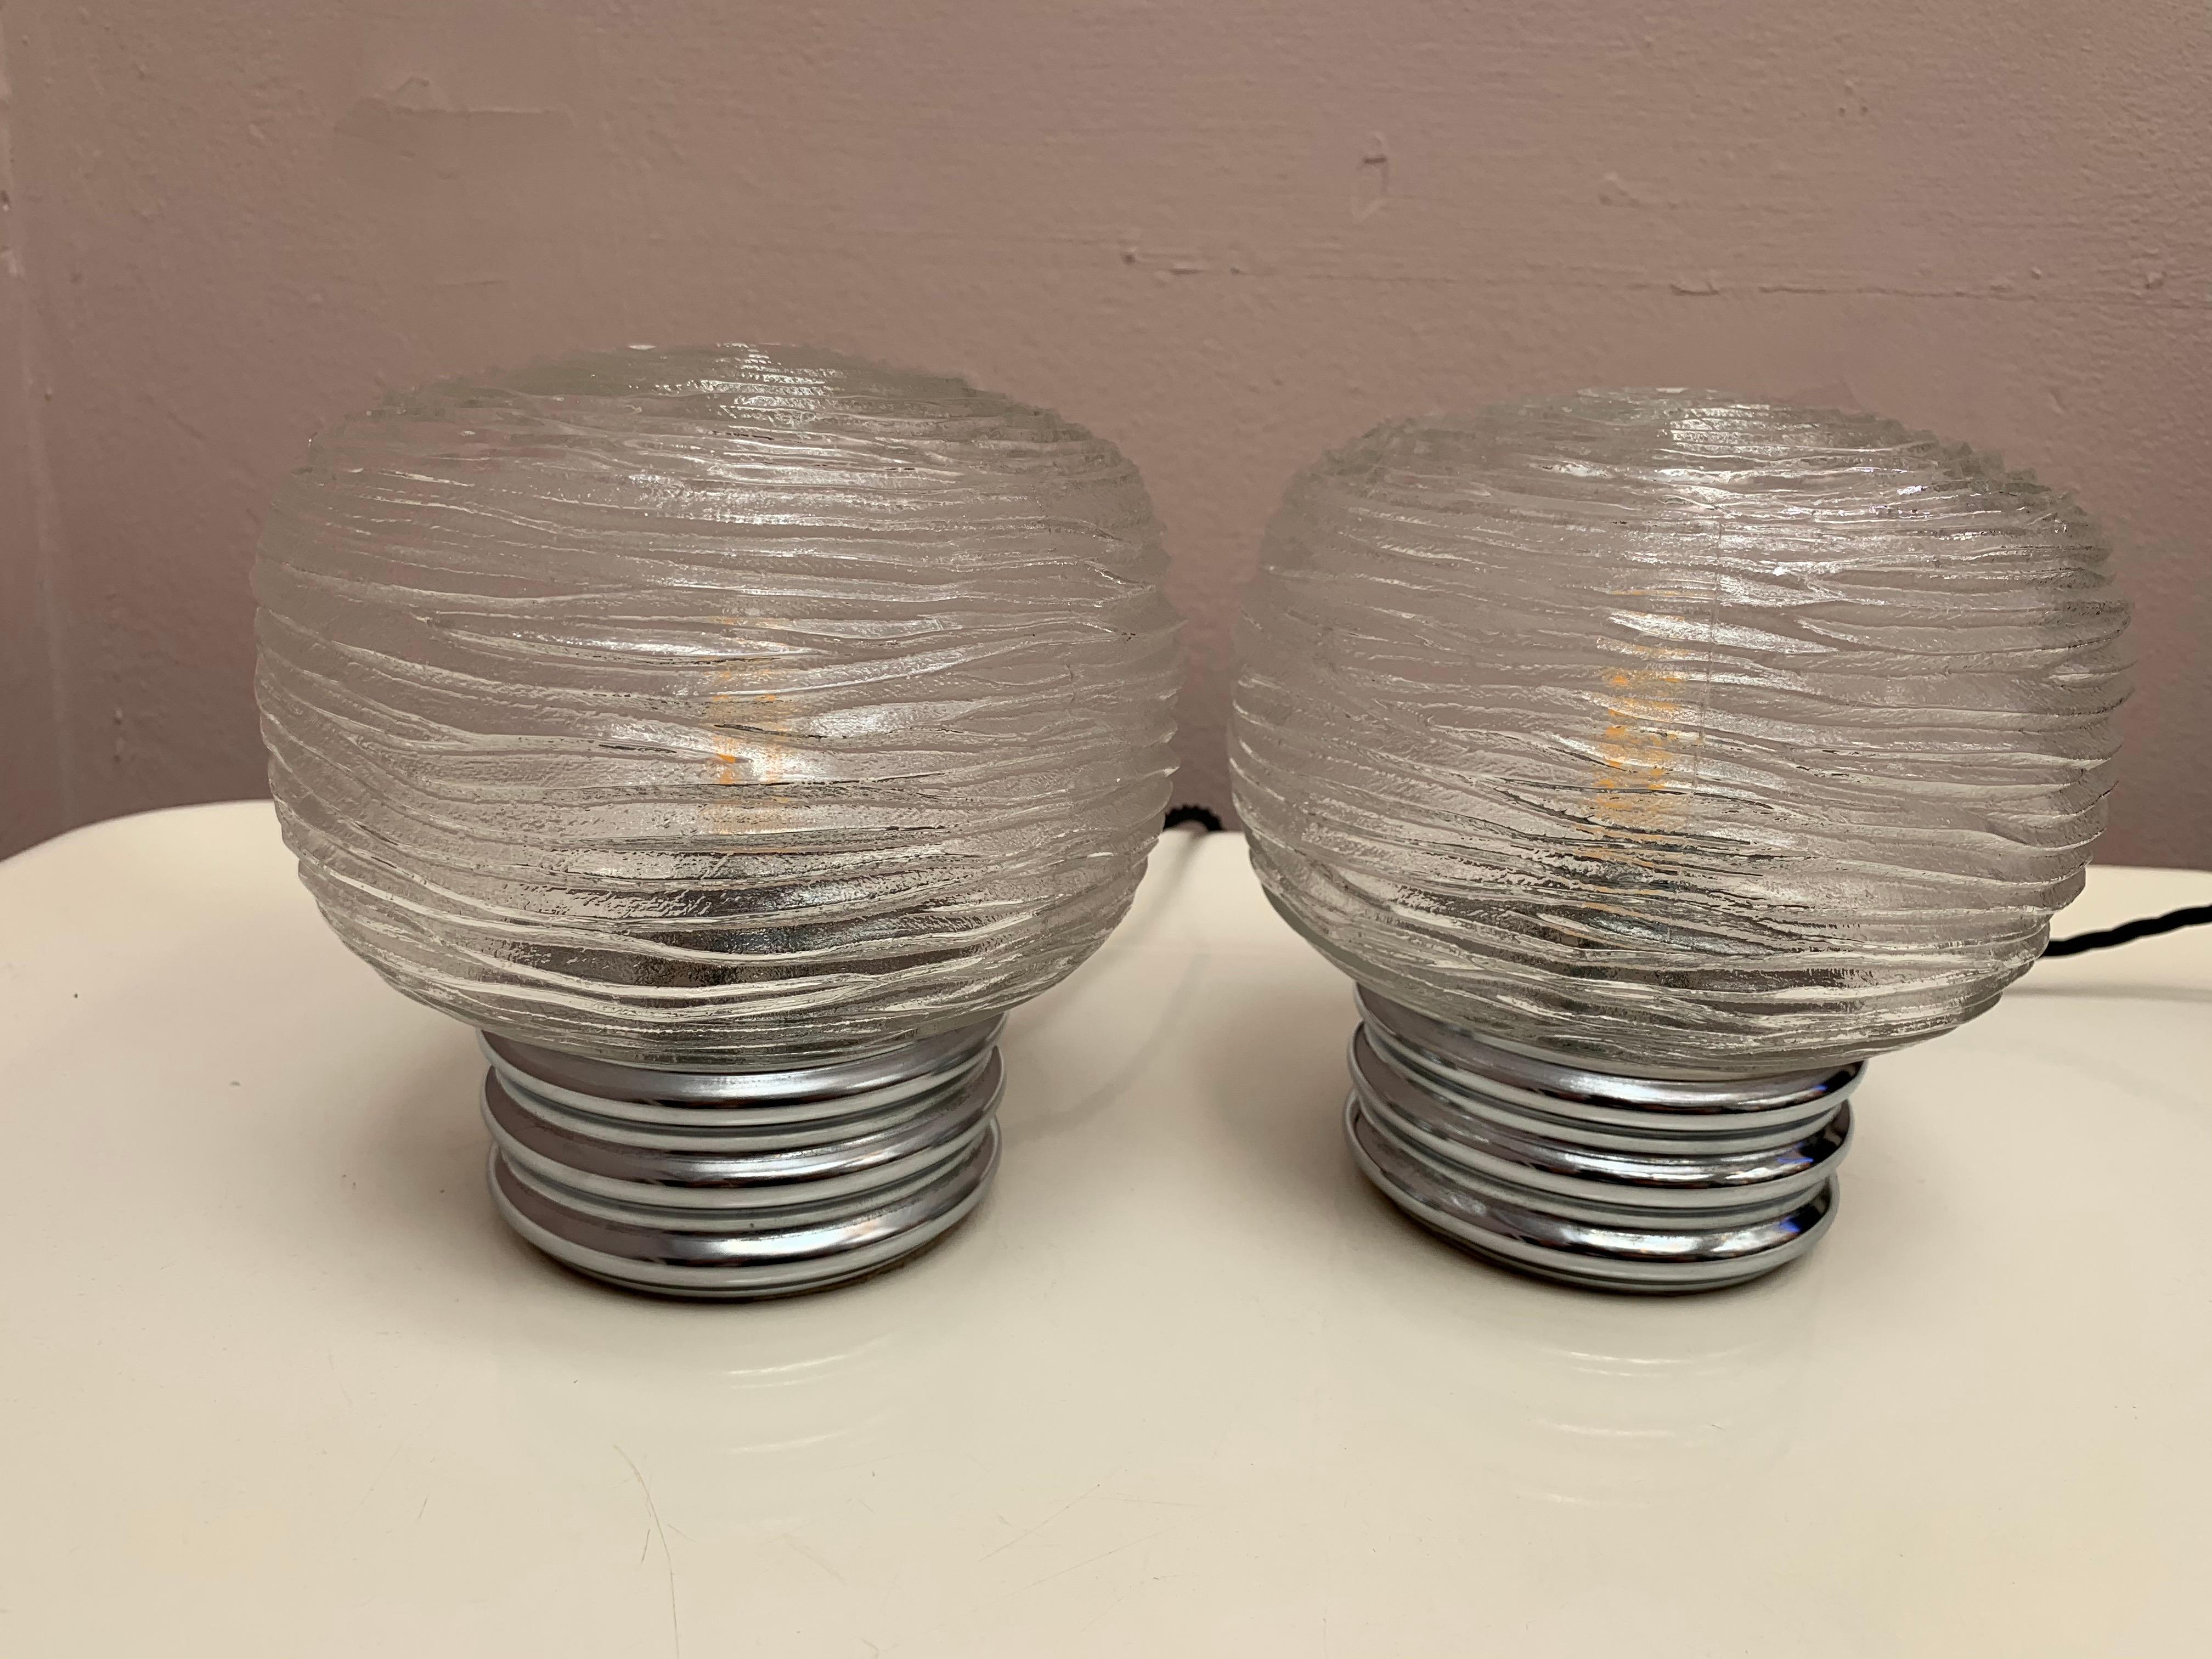 An unusual pair of chrome and glass table lamps each featuring an interesting swirled rose design around its surface. Manufactured by Hillebrand, Germany in the 1970s. The glass shade sits on a circular chrome base each with a felt bottom. An